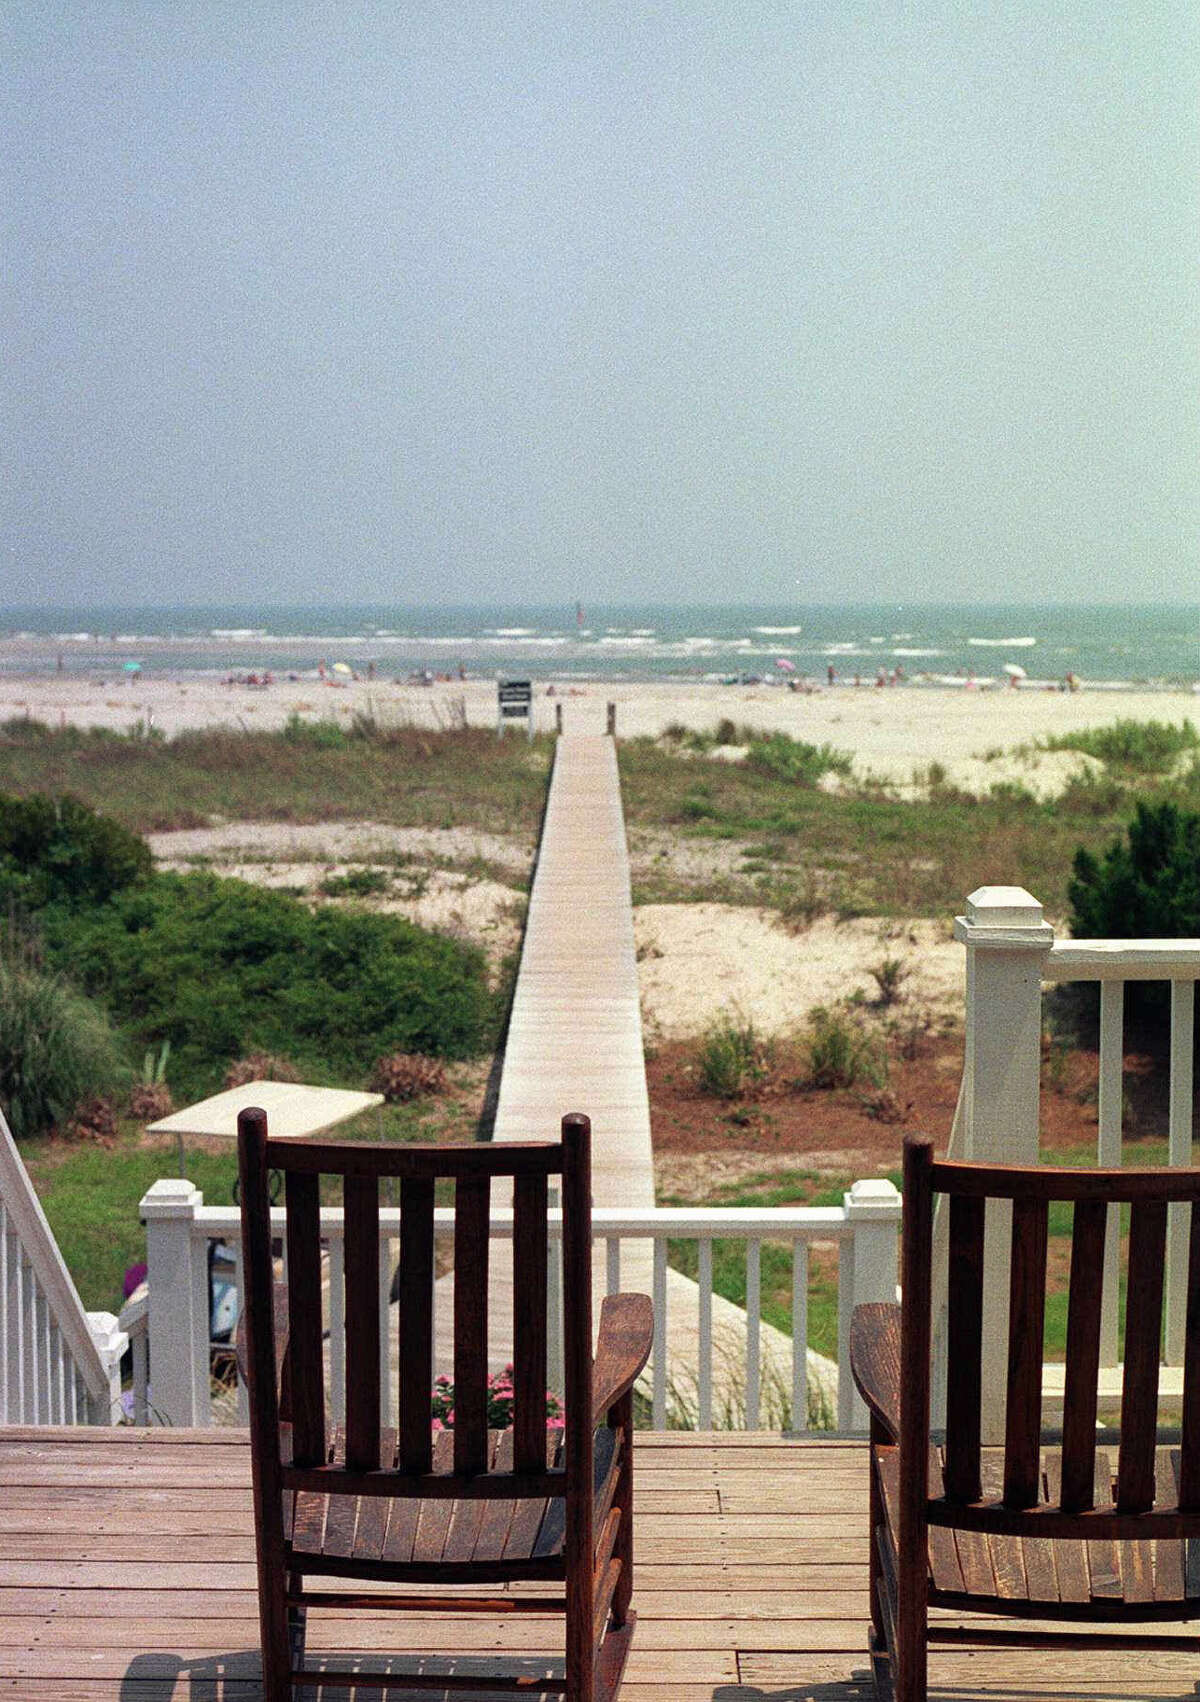 KRT TRAVEL STORY SLUGGED: PALMS KRT PHOTOGRAPH VIA THE CHARLOTTE OBSERVER (KRT12-Aug. 26) Beaches at Wild Dunes, north of Charleston, South Carolina, on the Isle of Palms, look straight from a PBS nature special. There are no crowds at this gated resort community's beaches, just crabs and gulls playing hide and seek. (jdl11324) 1996 (COLOR) (Additional photo available on KRT/Presslink or upon request.)